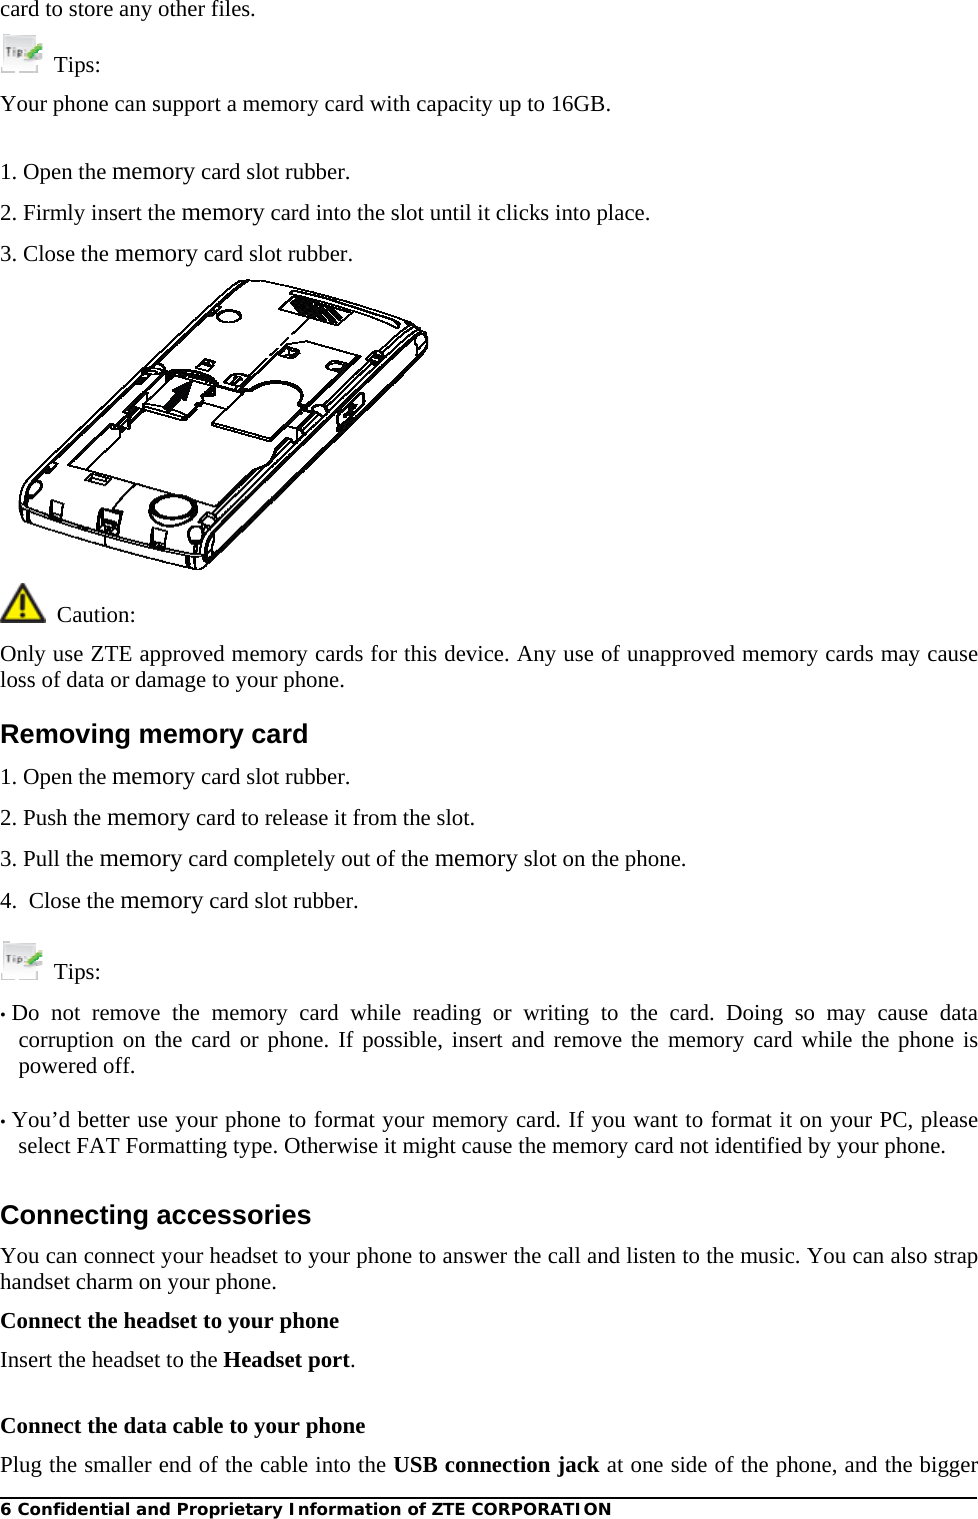 6 Confidential and Proprietary Information of ZTE CORPORATION card to store any other files.  Tips: Your phone can support a memory card with capacity up to 16GB.  1. Open the memory card slot rubber. 2. Firmly insert the memory card into the slot until it clicks into place. 3. Close the memory card slot rubber.    Caution: Only use ZTE approved memory cards for this device. Any use of unapproved memory cards may cause loss of data or damage to your phone. Removing memory card 1. Open the memory card slot rubber. 2. Push the memory card to release it from the slot. 3. Pull the memory card completely out of the memory slot on the phone. 4.  Close the memory card slot rubber.   Tips:  • Do not remove the memory card while reading or writing to the card. Doing so may cause data corruption on the card or phone. If possible, insert and remove the memory card while the phone is powered off.  • You’d better use your phone to format your memory card. If you want to format it on your PC, please select FAT Formatting type. Otherwise it might cause the memory card not identified by your phone.  Connecting accessories You can connect your headset to your phone to answer the call and listen to the music. You can also strap handset charm on your phone. Connect the headset to your phone Insert the headset to the Headset port.  Connect the data cable to your phone Plug the smaller end of the cable into the USB connection jack at one side of the phone, and the bigger 